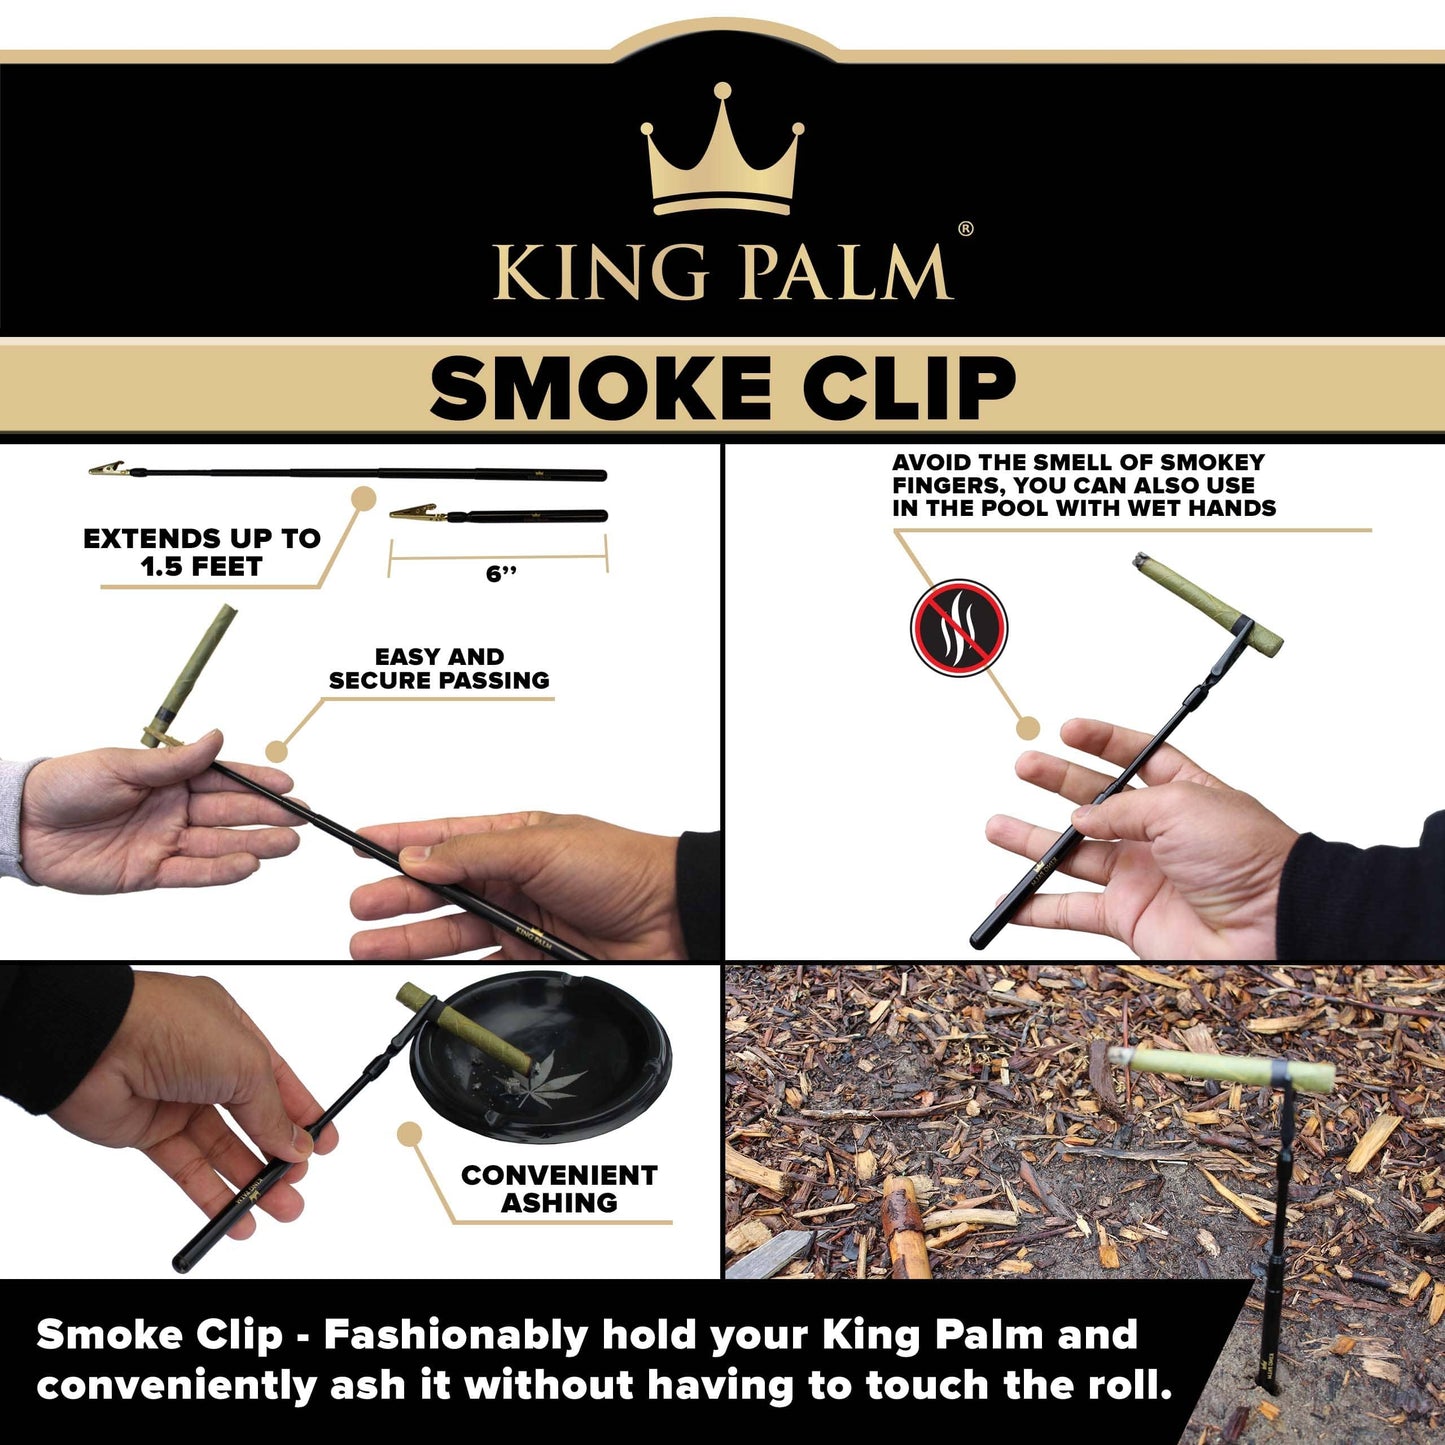 King Palm Gold Roach 18" Extendable Clips - 24 Per Pack